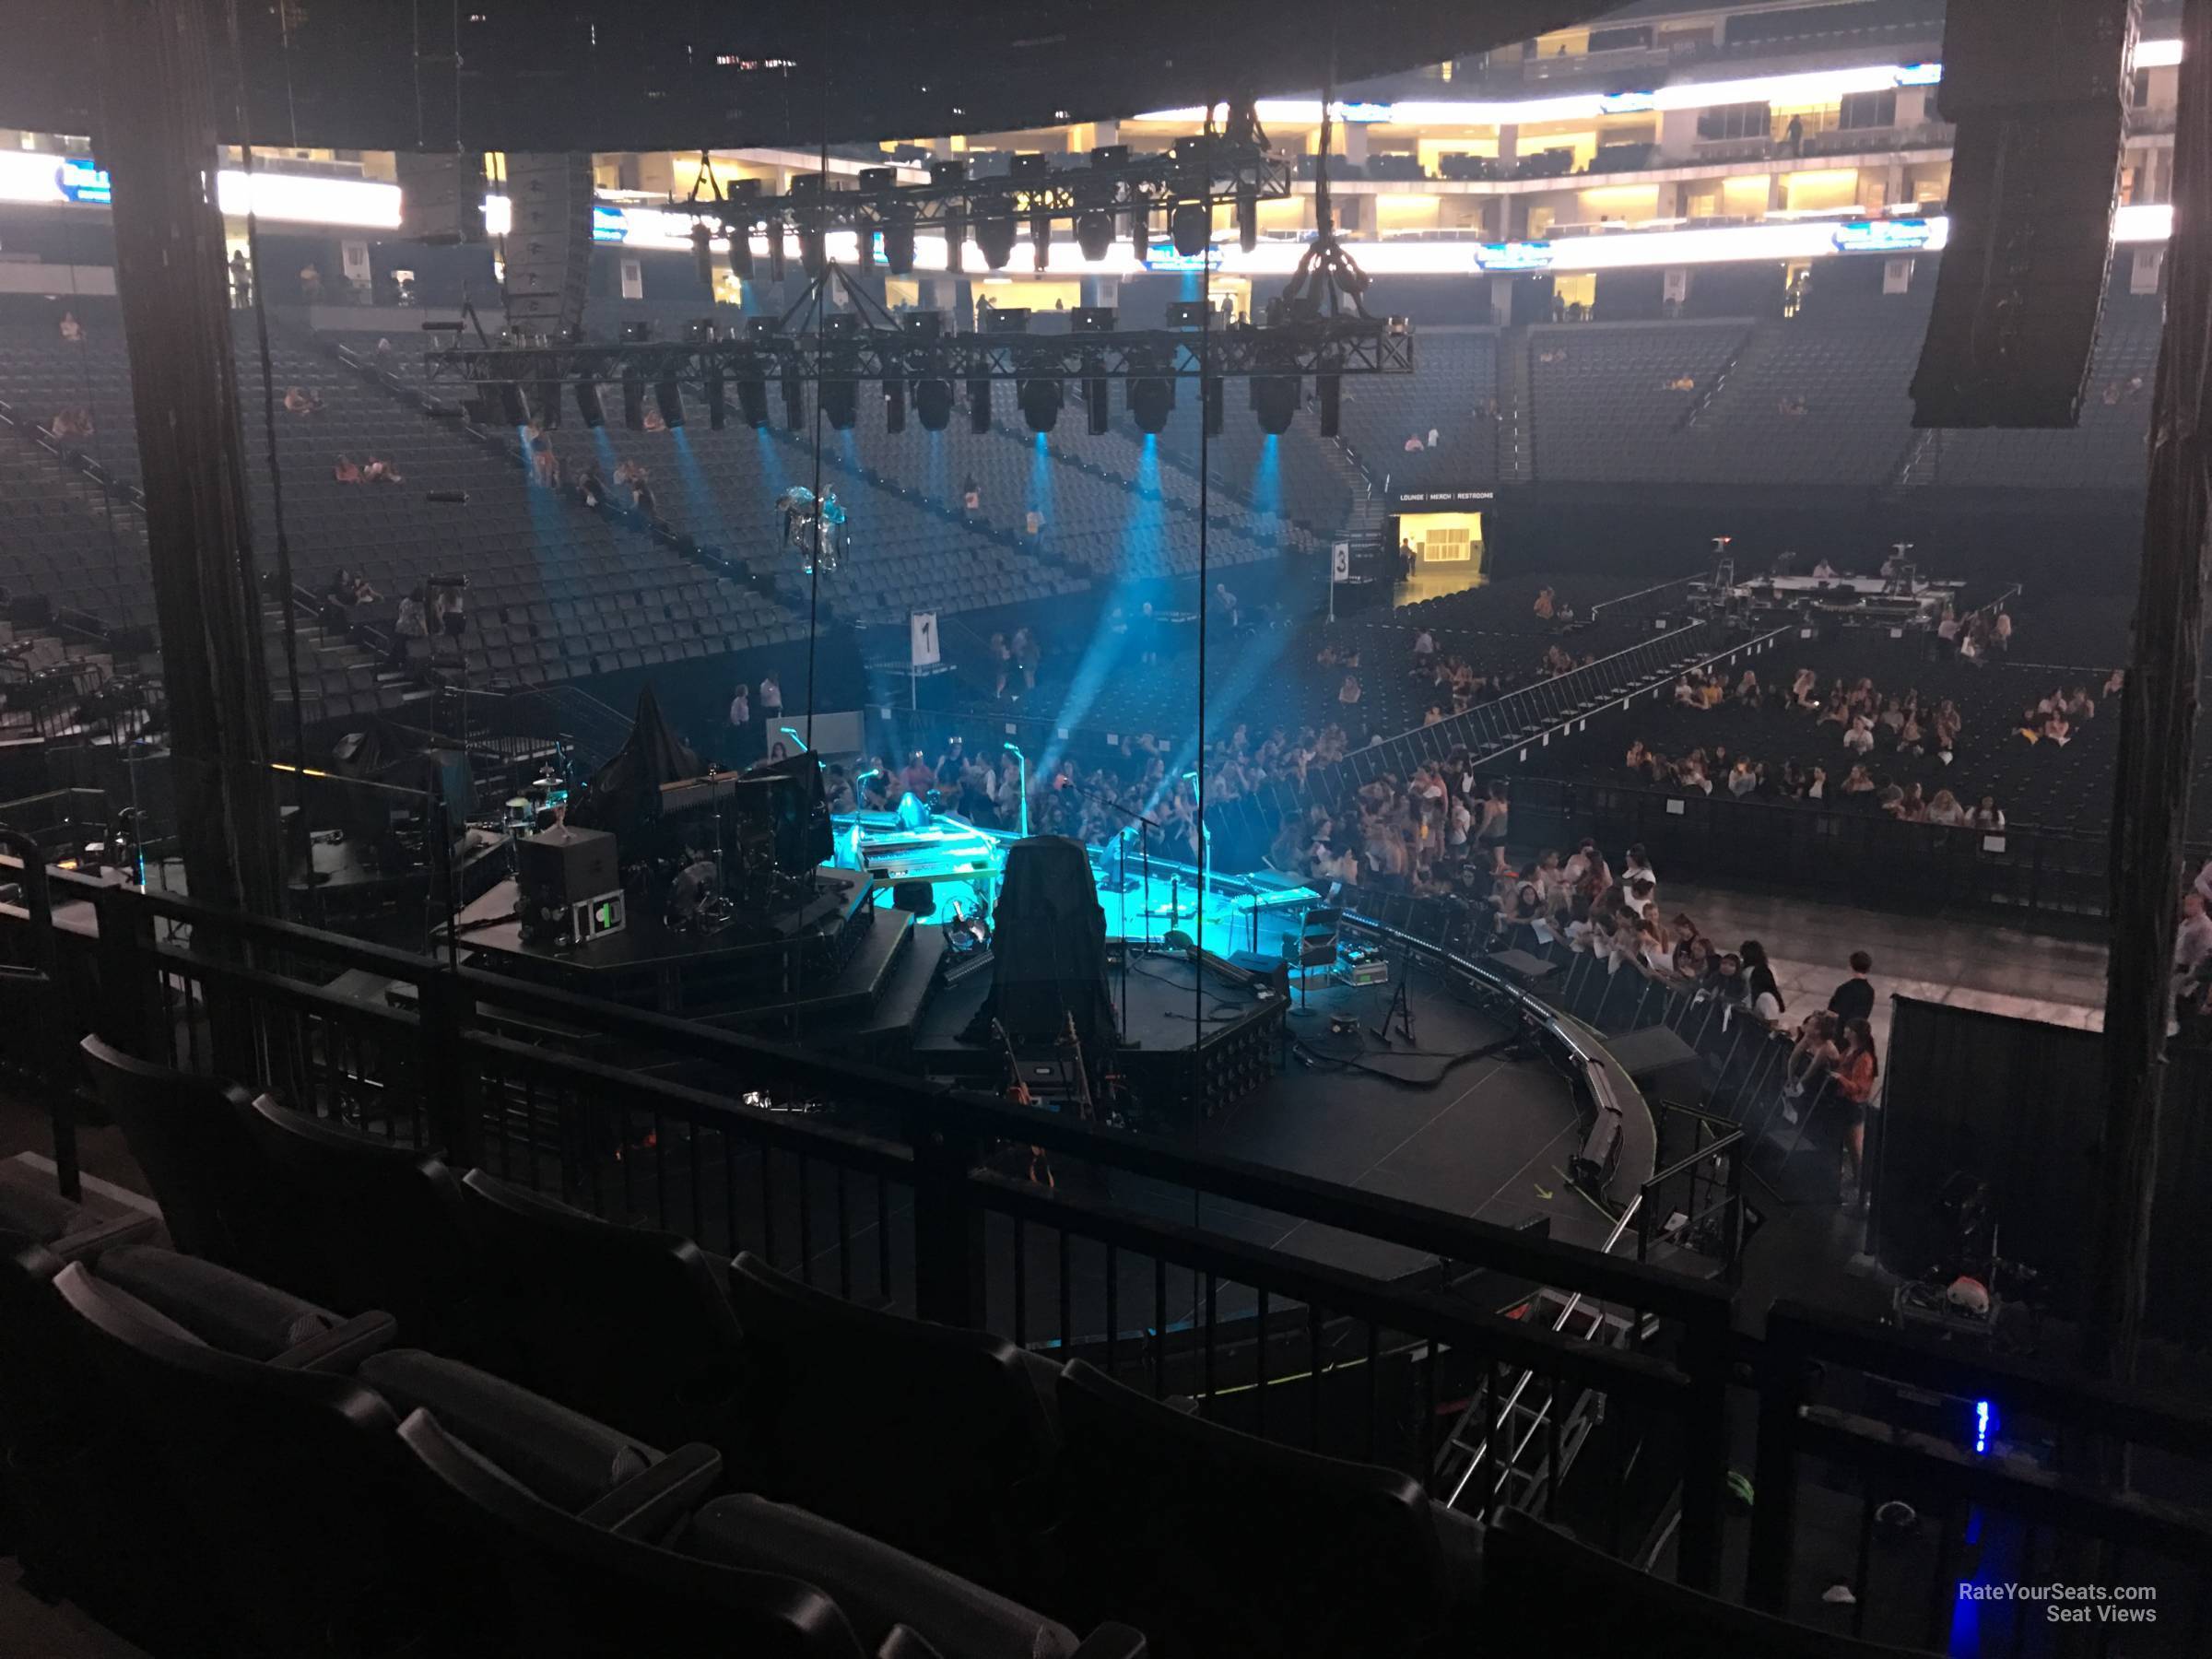 Section 125 at Golden 1 Center for Concerts